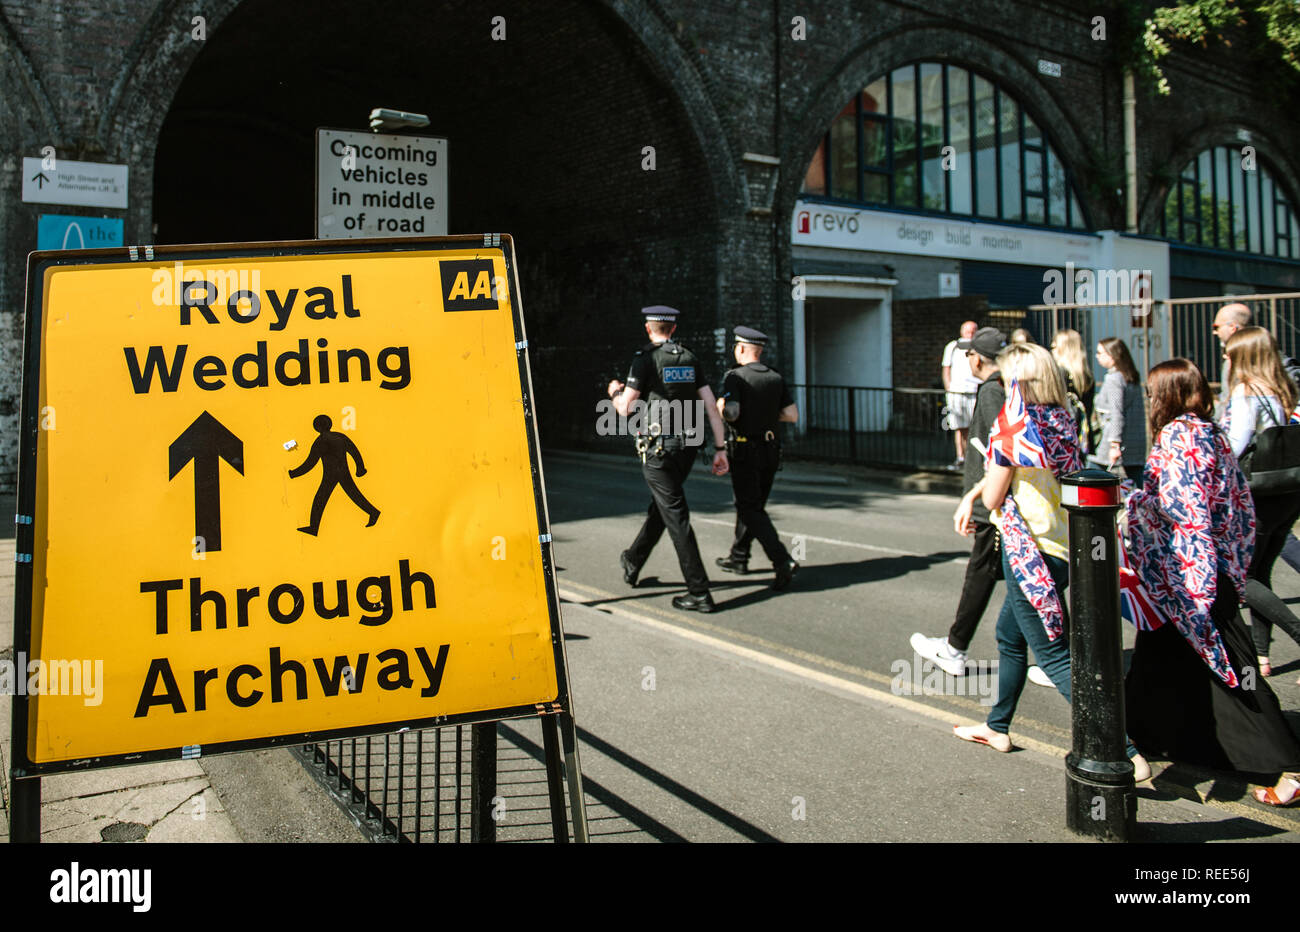 WINDSOR, BERKSHIRE, UNITED KINGDOM - MAY 19, 2018: Crowd walking near Royal Wedding road sign on the day of the royal wedding of Prince Harry and Meghan Markle  Stock Photo